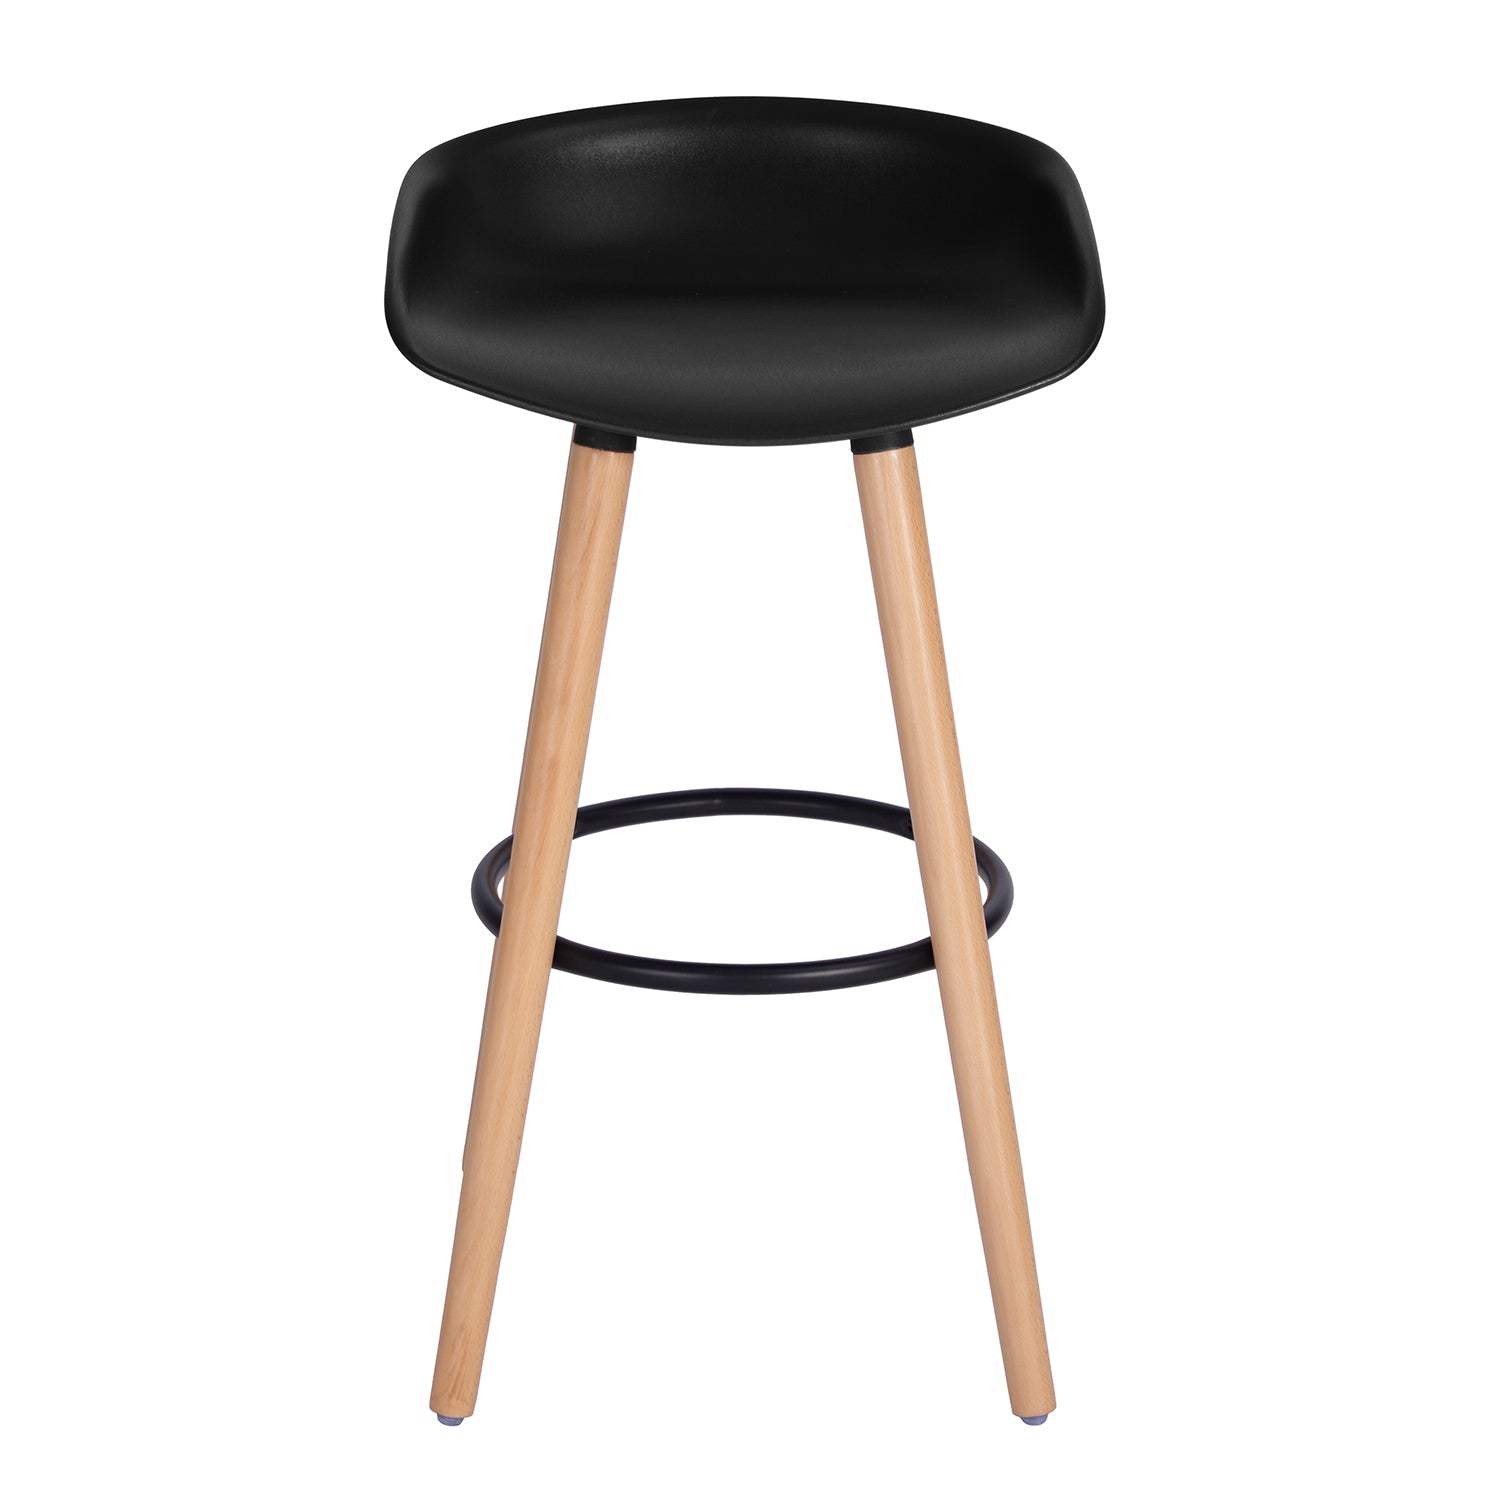 Set of 2 bar stools with footrest